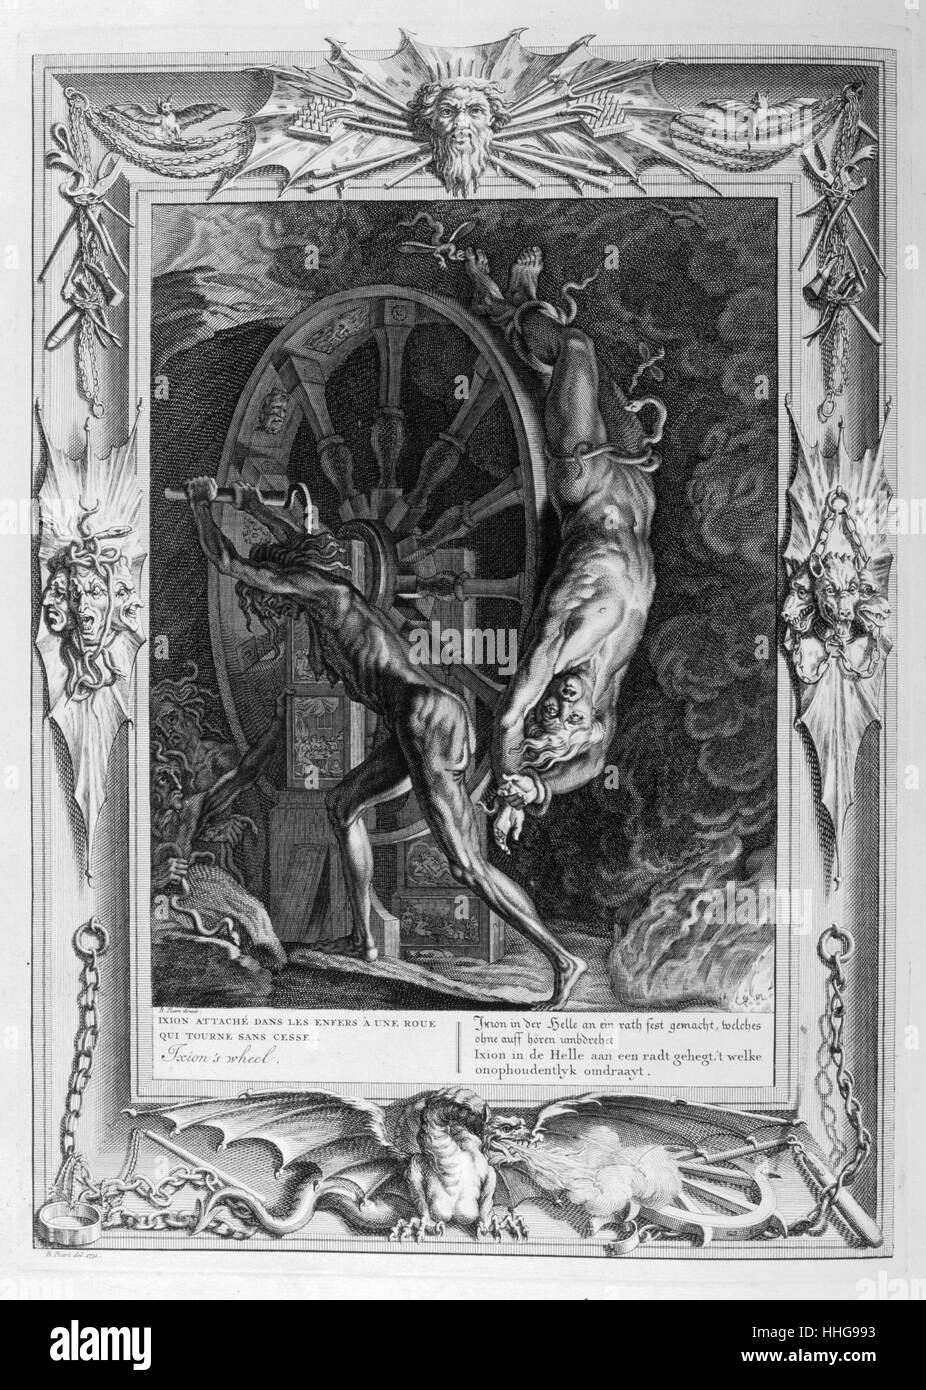 Ixion was expelled from Olympus and blasted with a thunderbolt. Zeus ordered Hermes to bind Ixion to a winged fiery wheel that was always spinning. Plate from Les Images Ou Tableaux De Platte Peinture Des Deux Philostrates Sophistes Grecs, by Blaise de Vigenère, Paris, 1615. Engraving circa 1615, by Leonard Gaultier. Gaultier, or Galter, was a French engraver, born at Mainz about 1561, and died in Paris in 1641. In Greek mythology, Ixion was king of the Lapiths, the most ancient tribe of Thessaly, and a son of Ares, or Leonteus, or Antion and Perimele, or the notorious evildoer Phlegyas Stock Photo